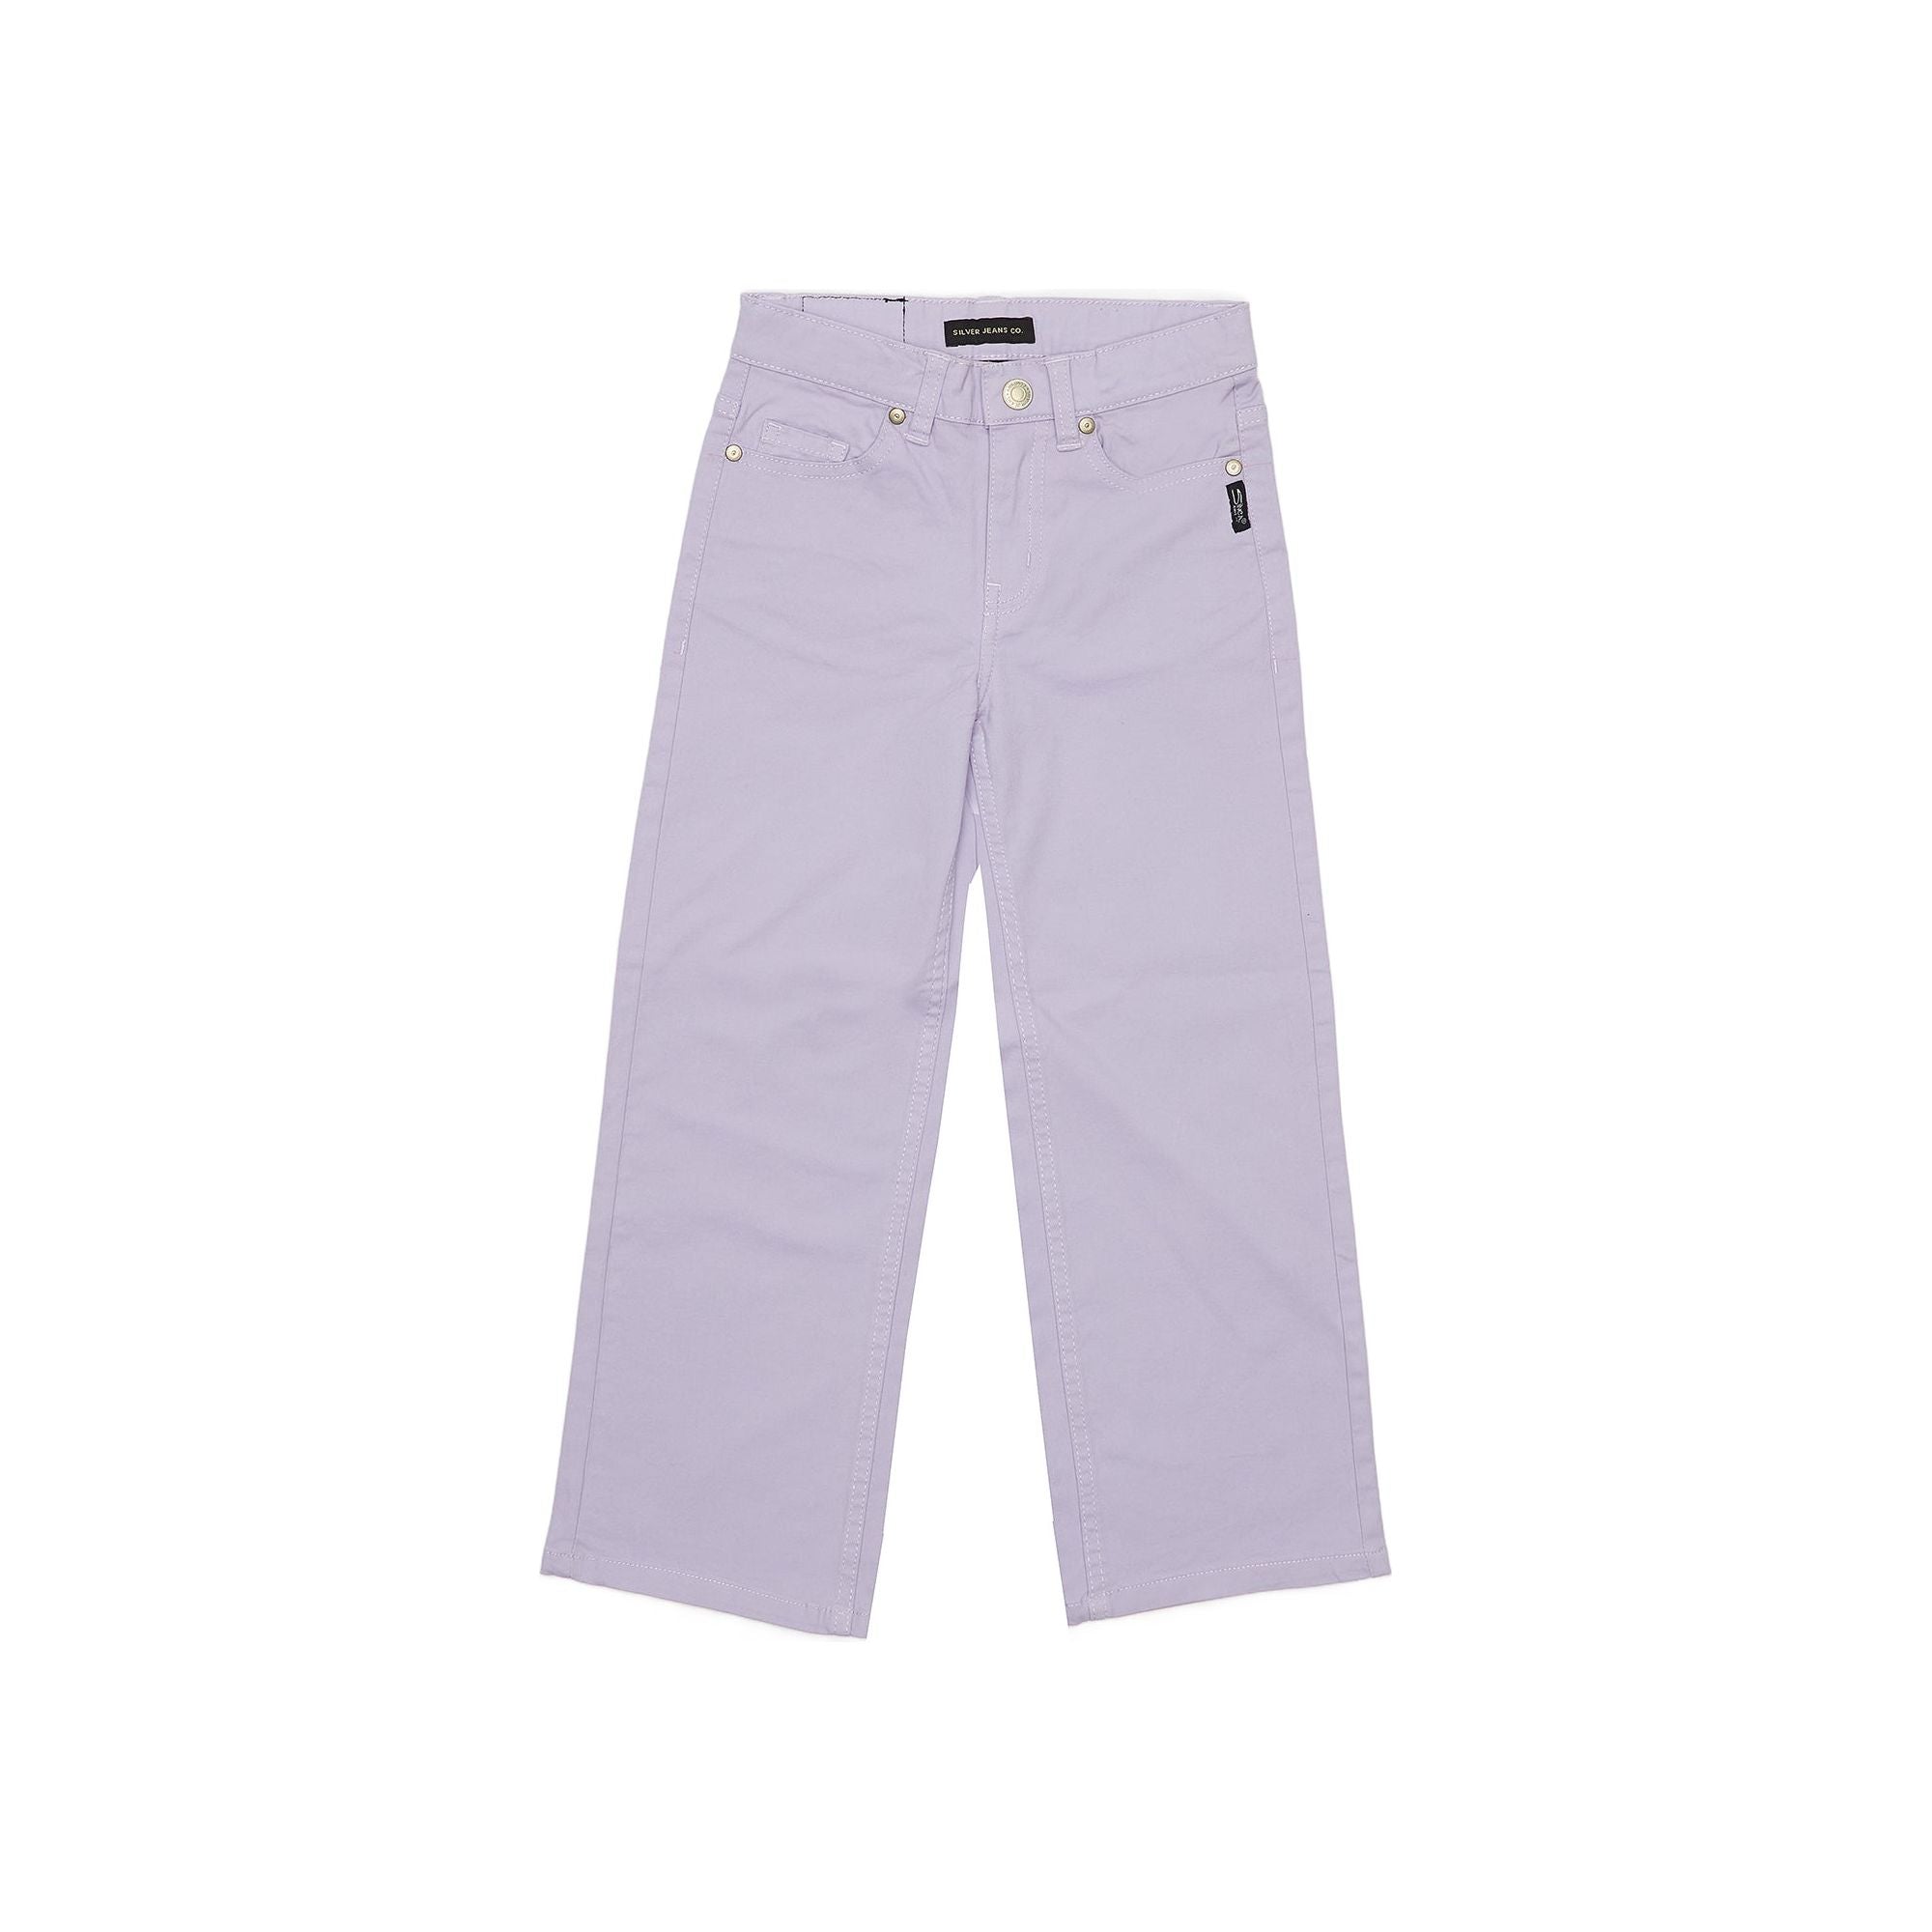 Silver Jeans - Girls Wide Leg Pant in Lavender